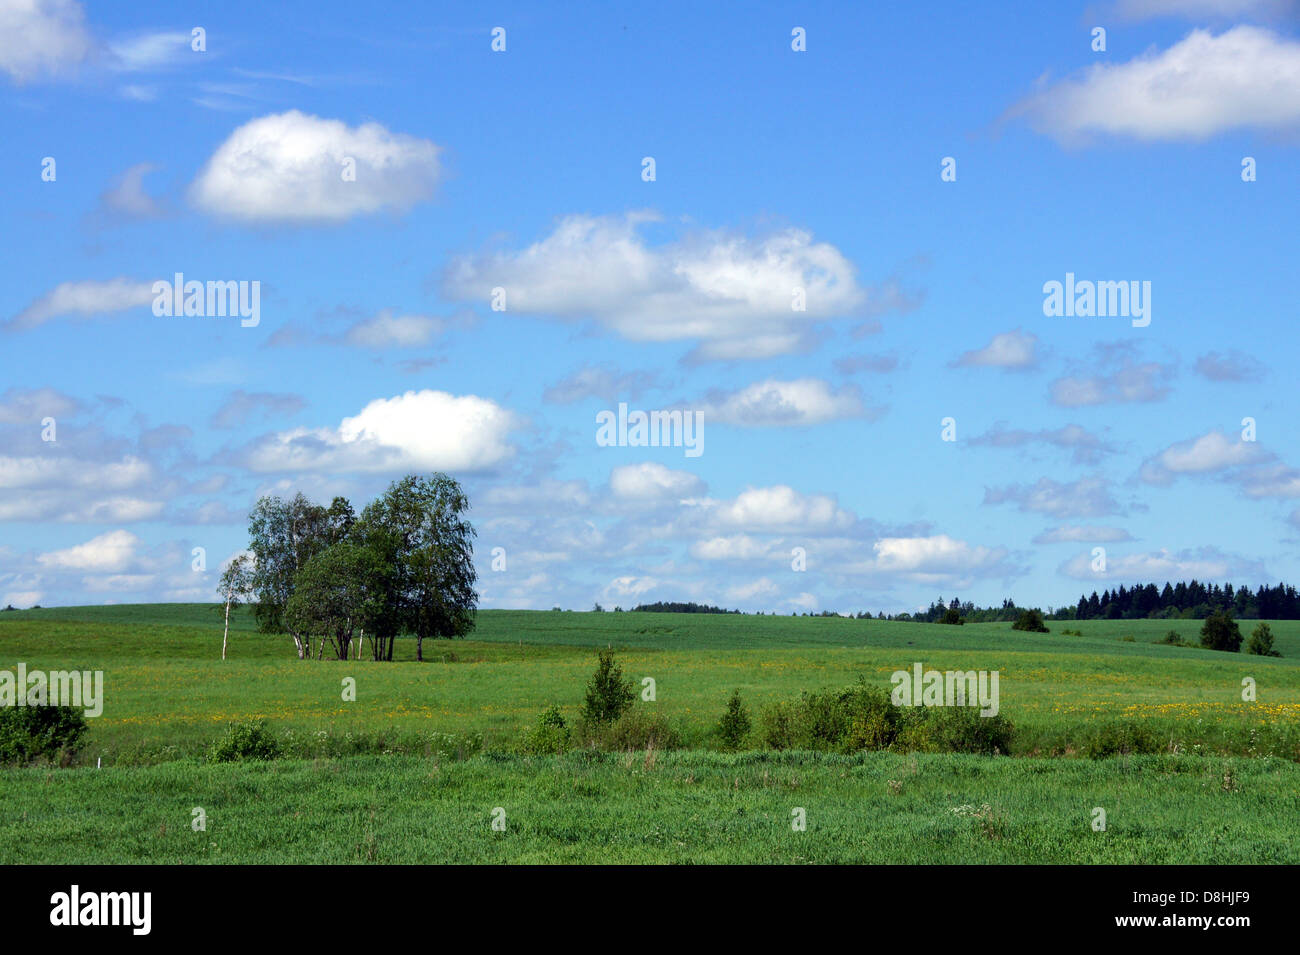 Landscape with the cloudy sky and plants Stock Photo